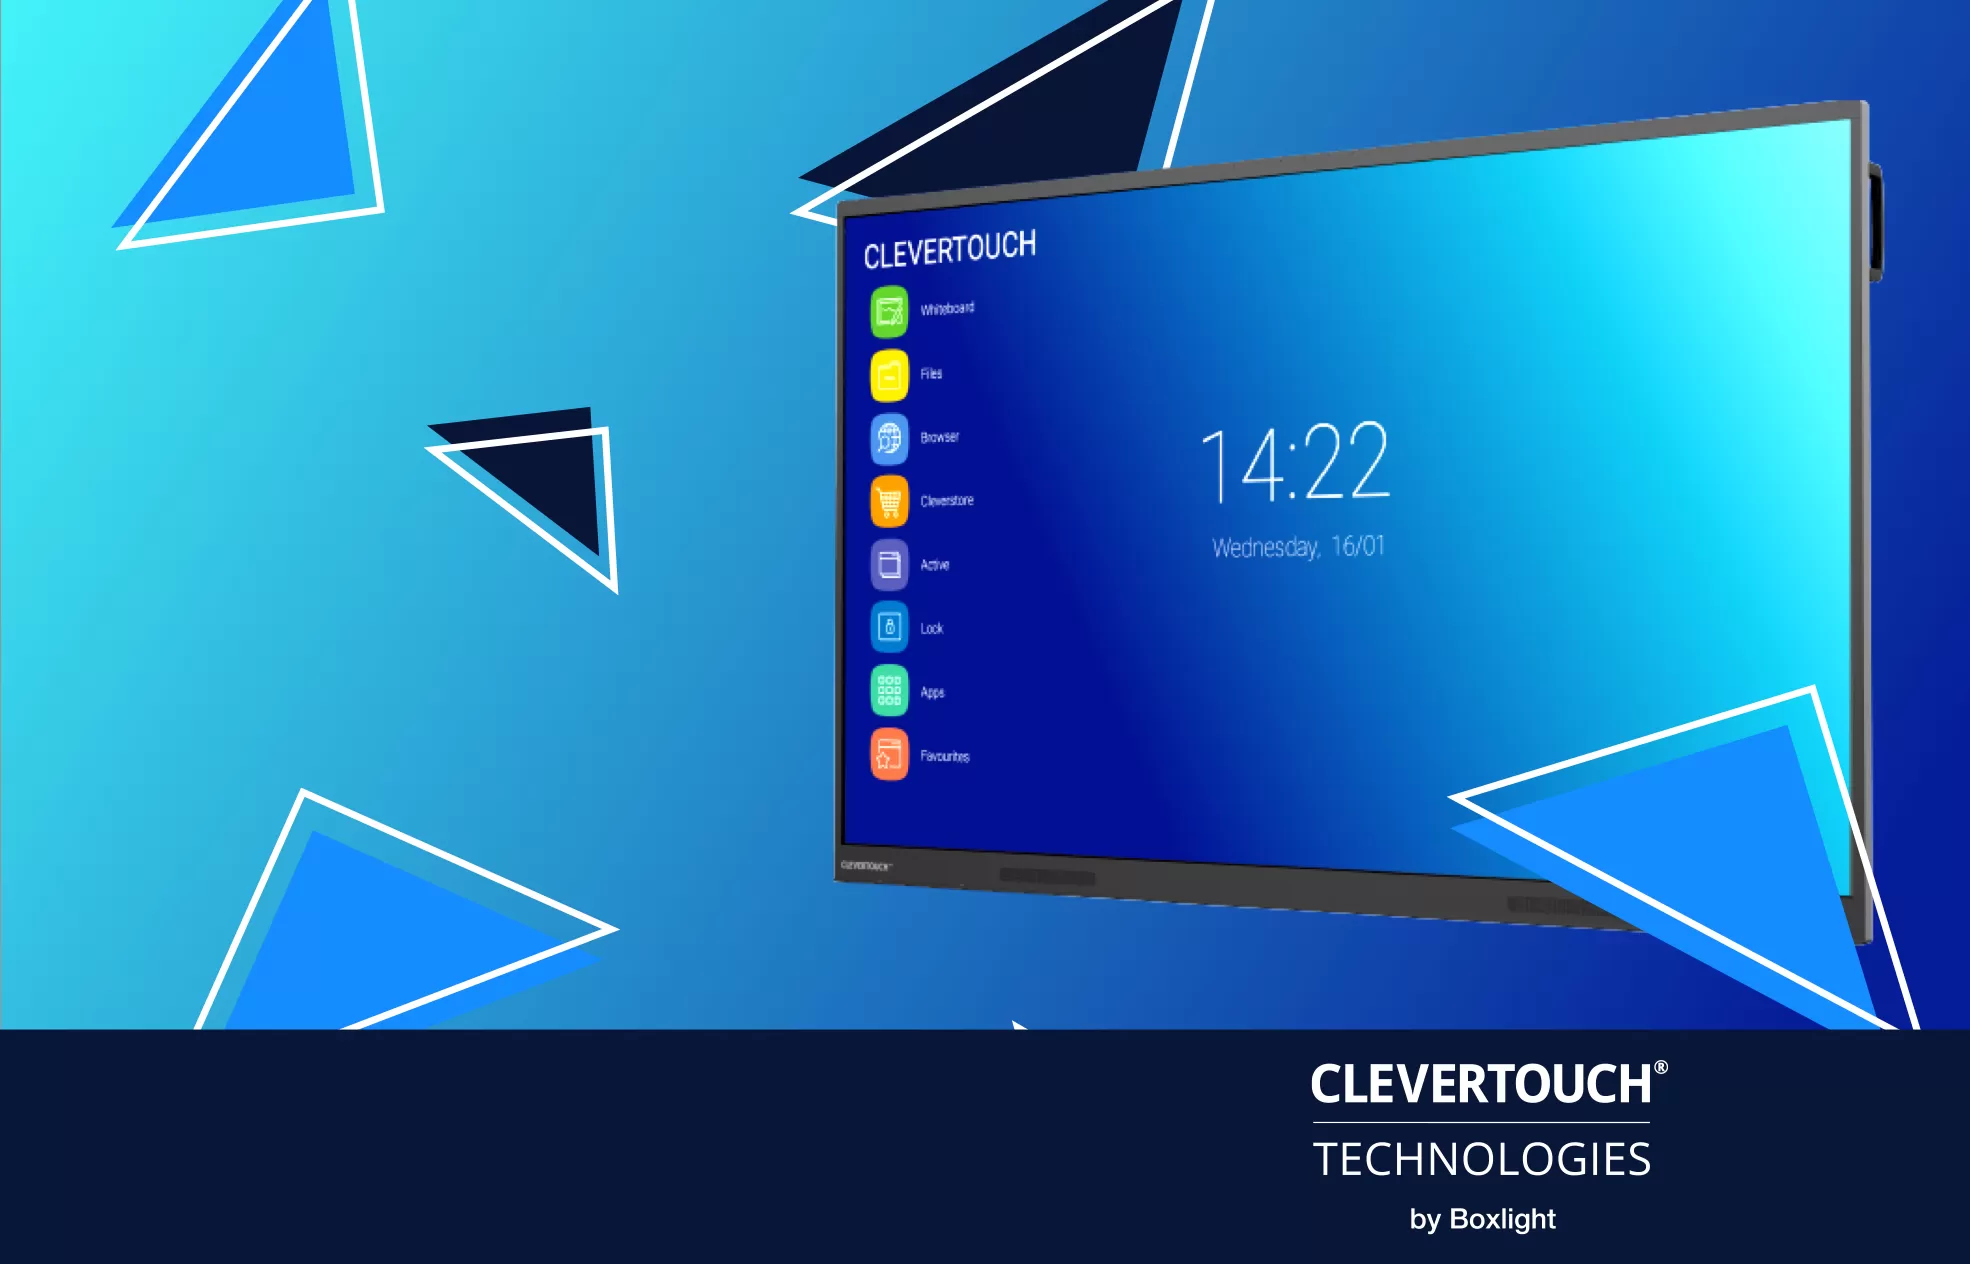 imact plus display on a blue background with triangles and a banner saying 'Clevertouch technologies by Boxlight' across the bottom